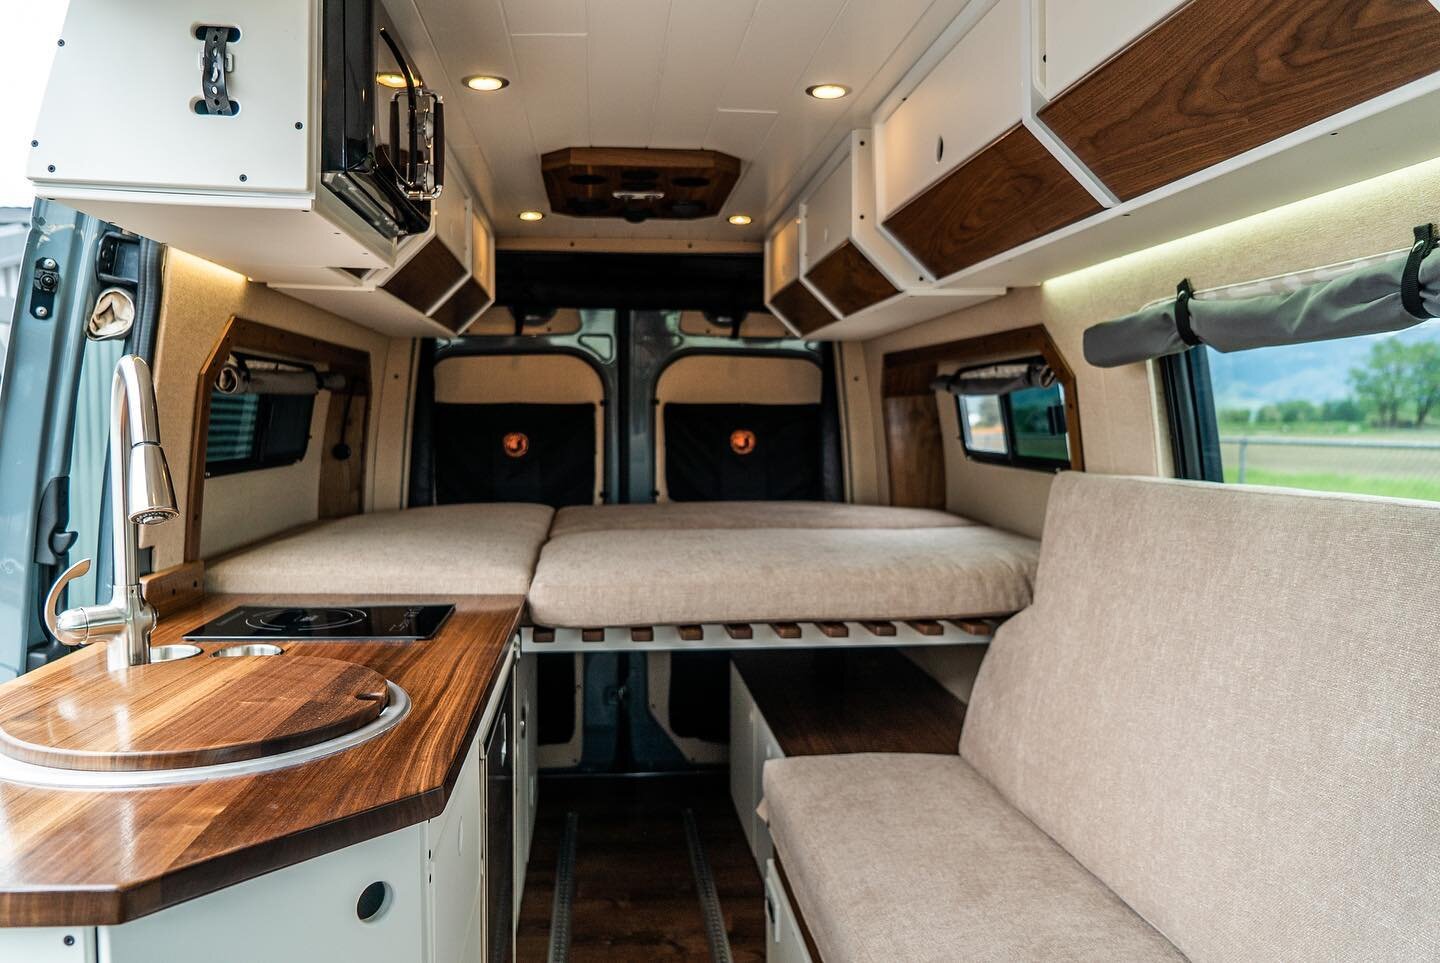 Don&rsquo;t let anyone tell you that you can&rsquo;t have it all! Head over to our website and let us know what you want in your van, and we&rsquo;ll make it happen! 2 beds, a lounge area, and a full kitchen? You got it! 

#ruggedliberation 
📸: @ten